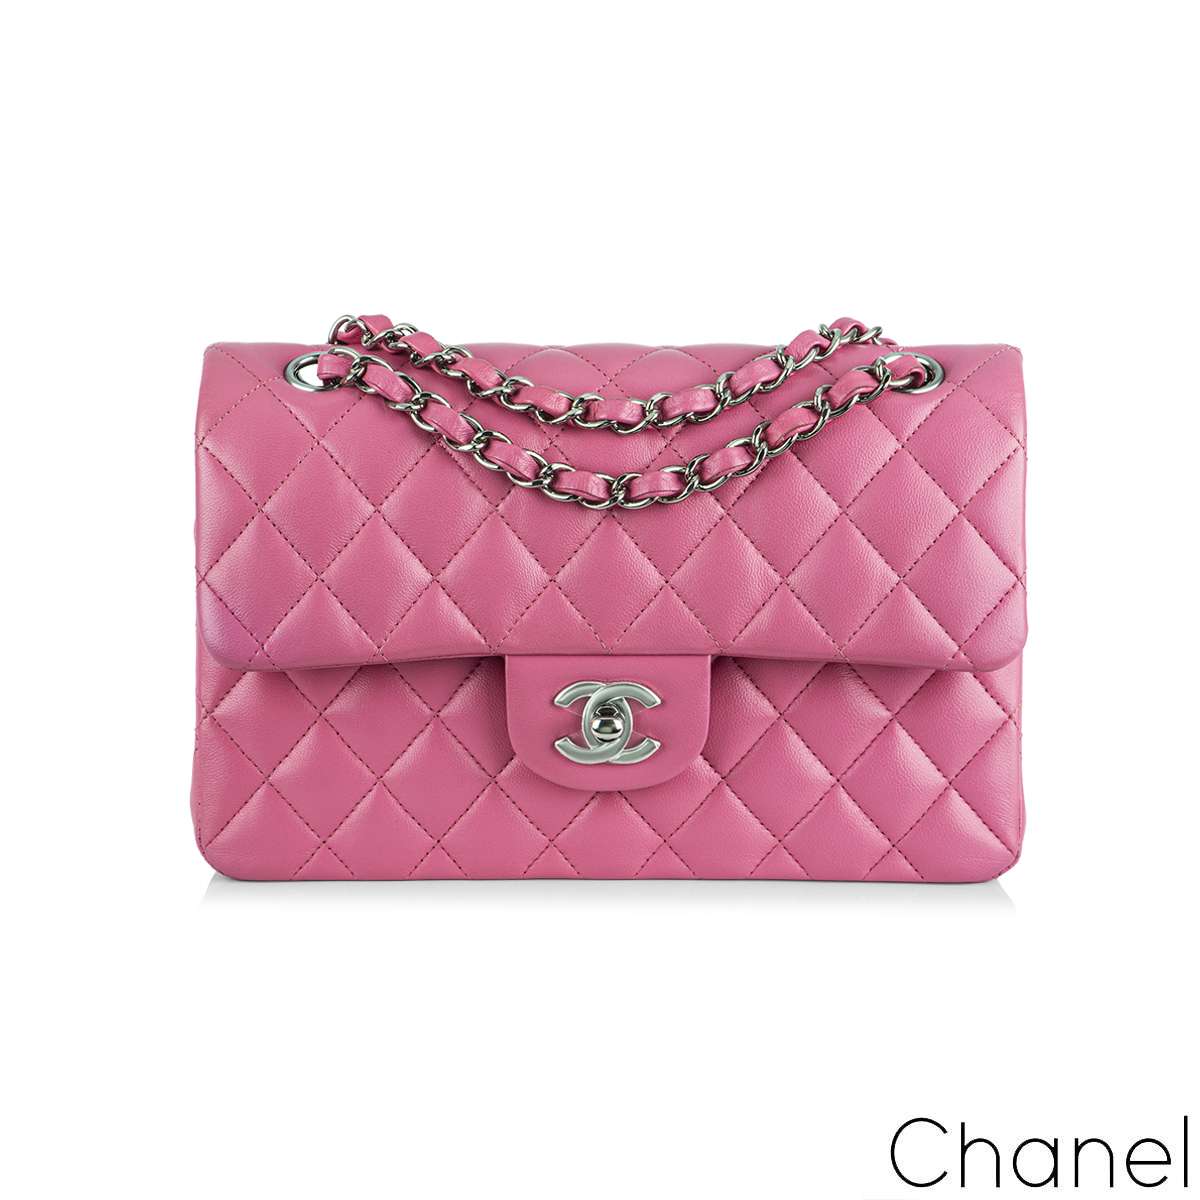 Chanel Classic Small Flap Bag in Metallic Gold Iridescent Calfskin with  Champagne Gold Hardware New